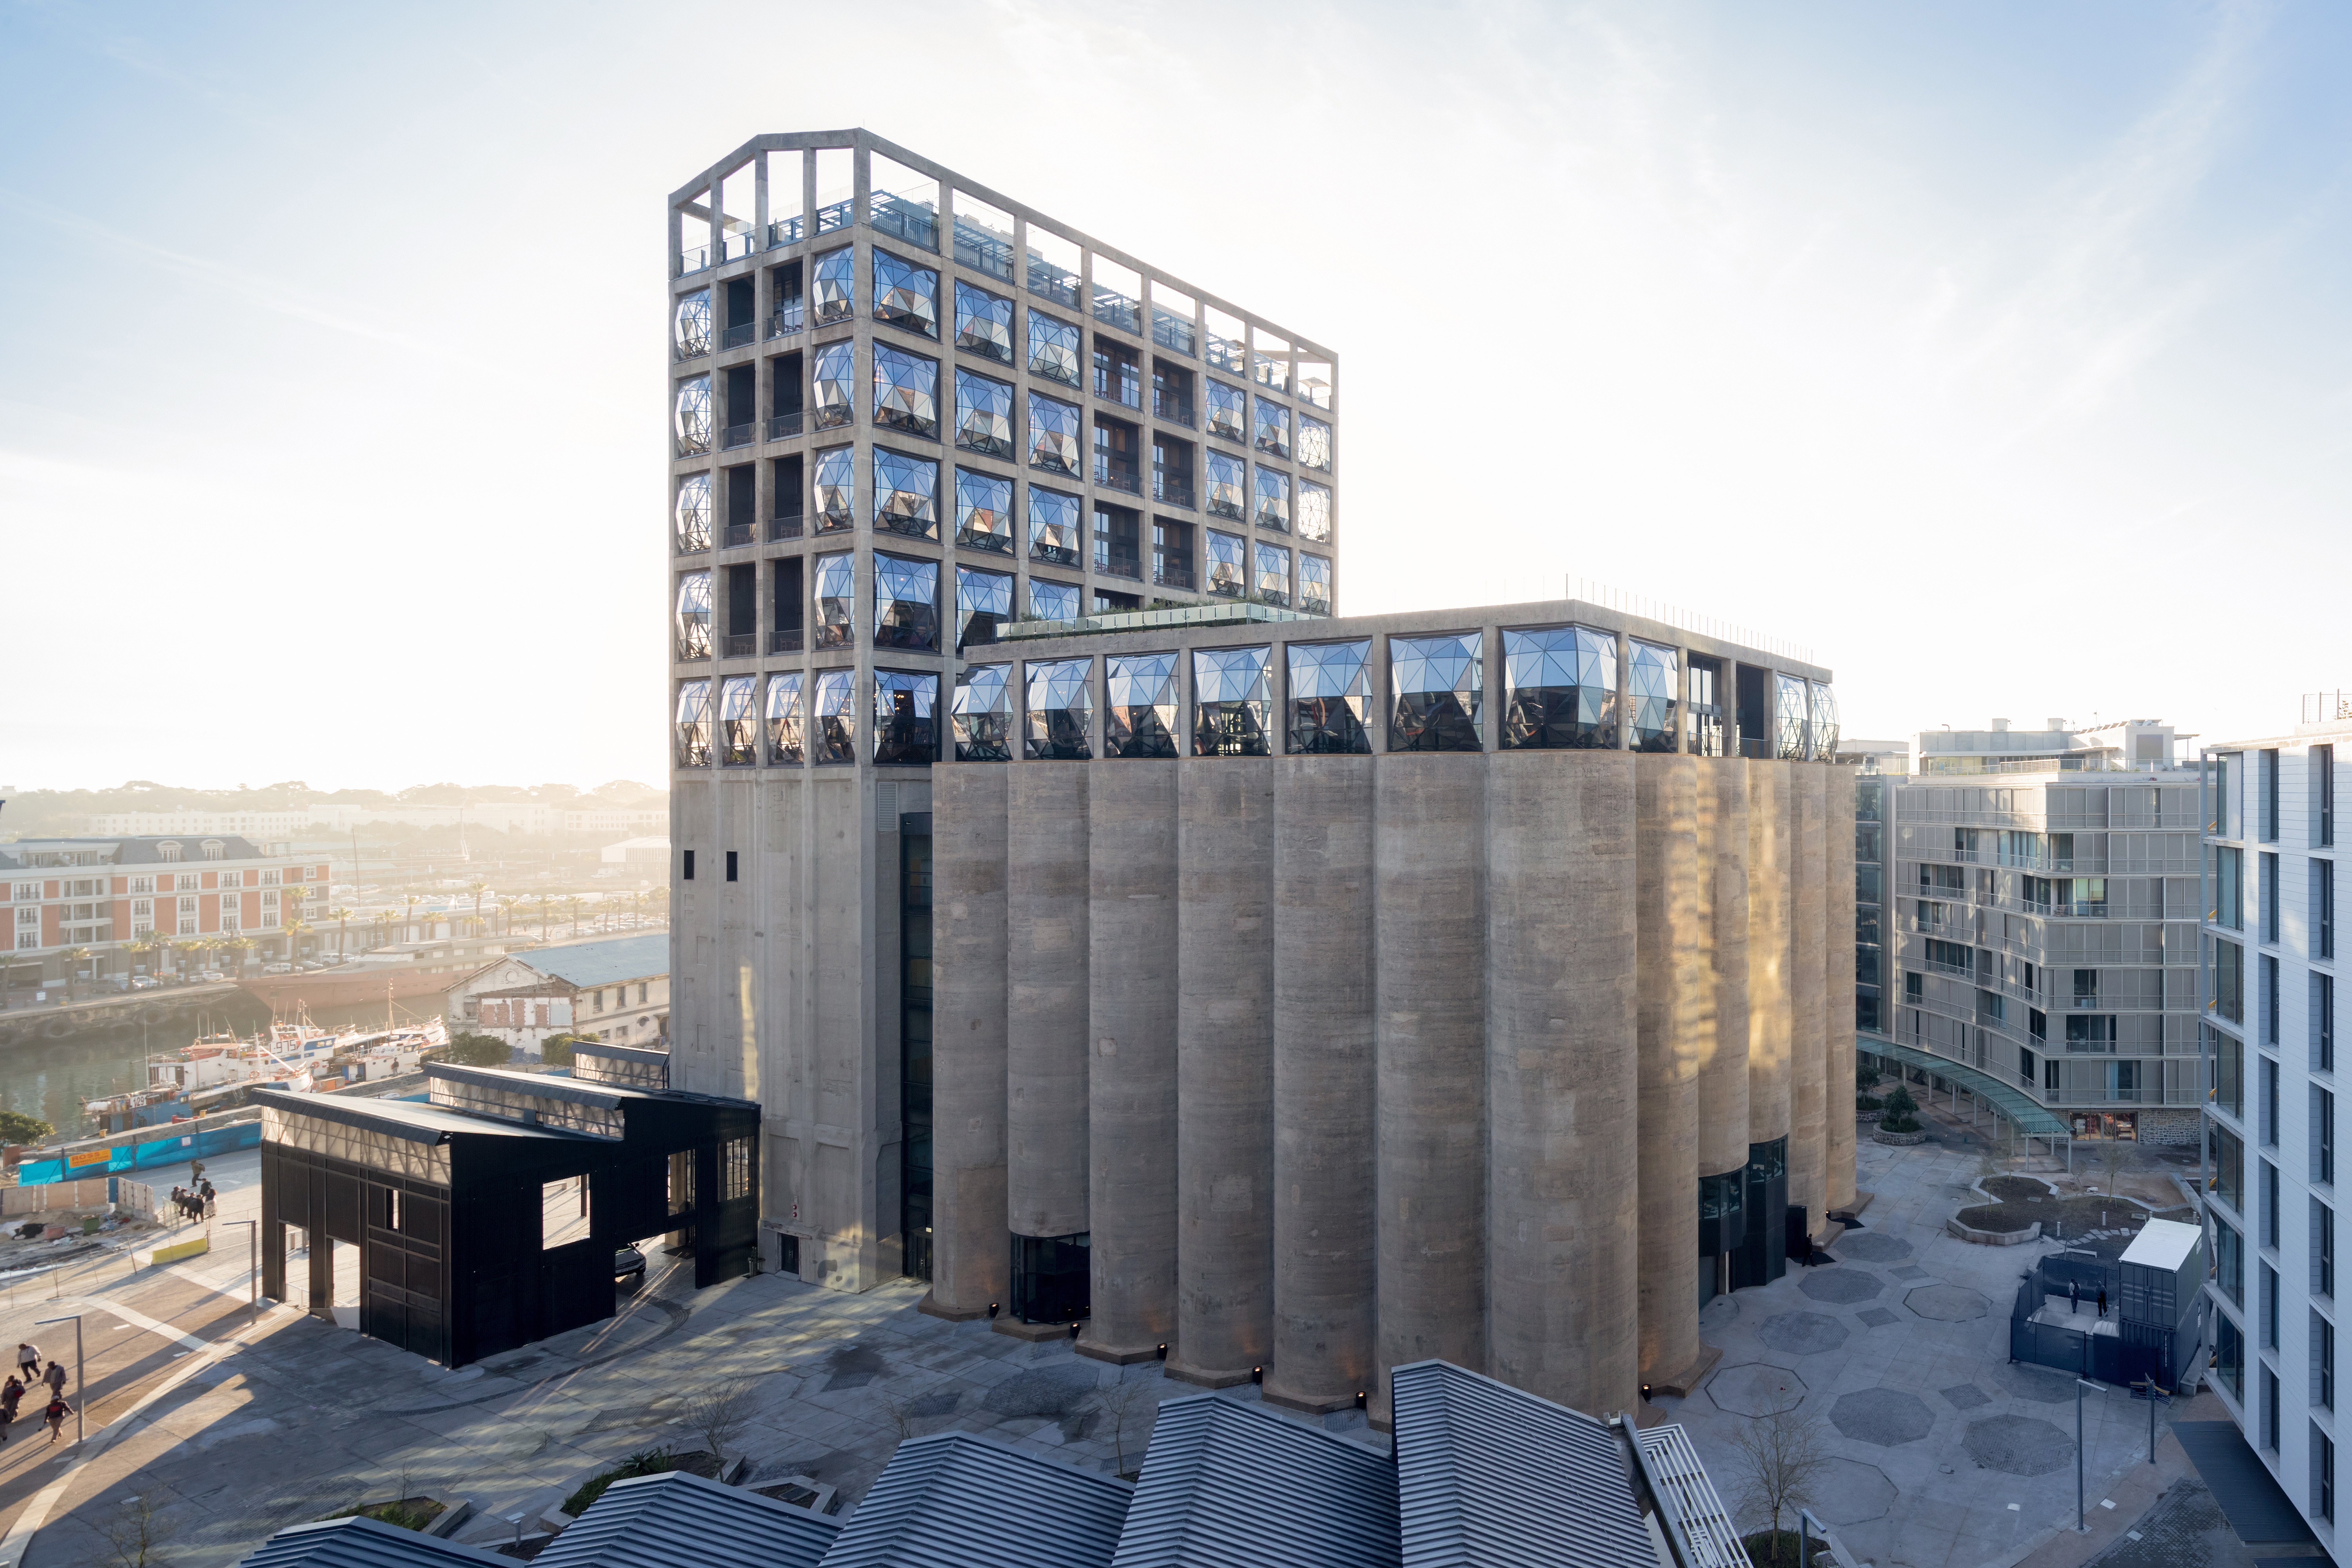 How a Decrepit Grain Silo Became South Africa's Mind-Blowing Zeitz ...